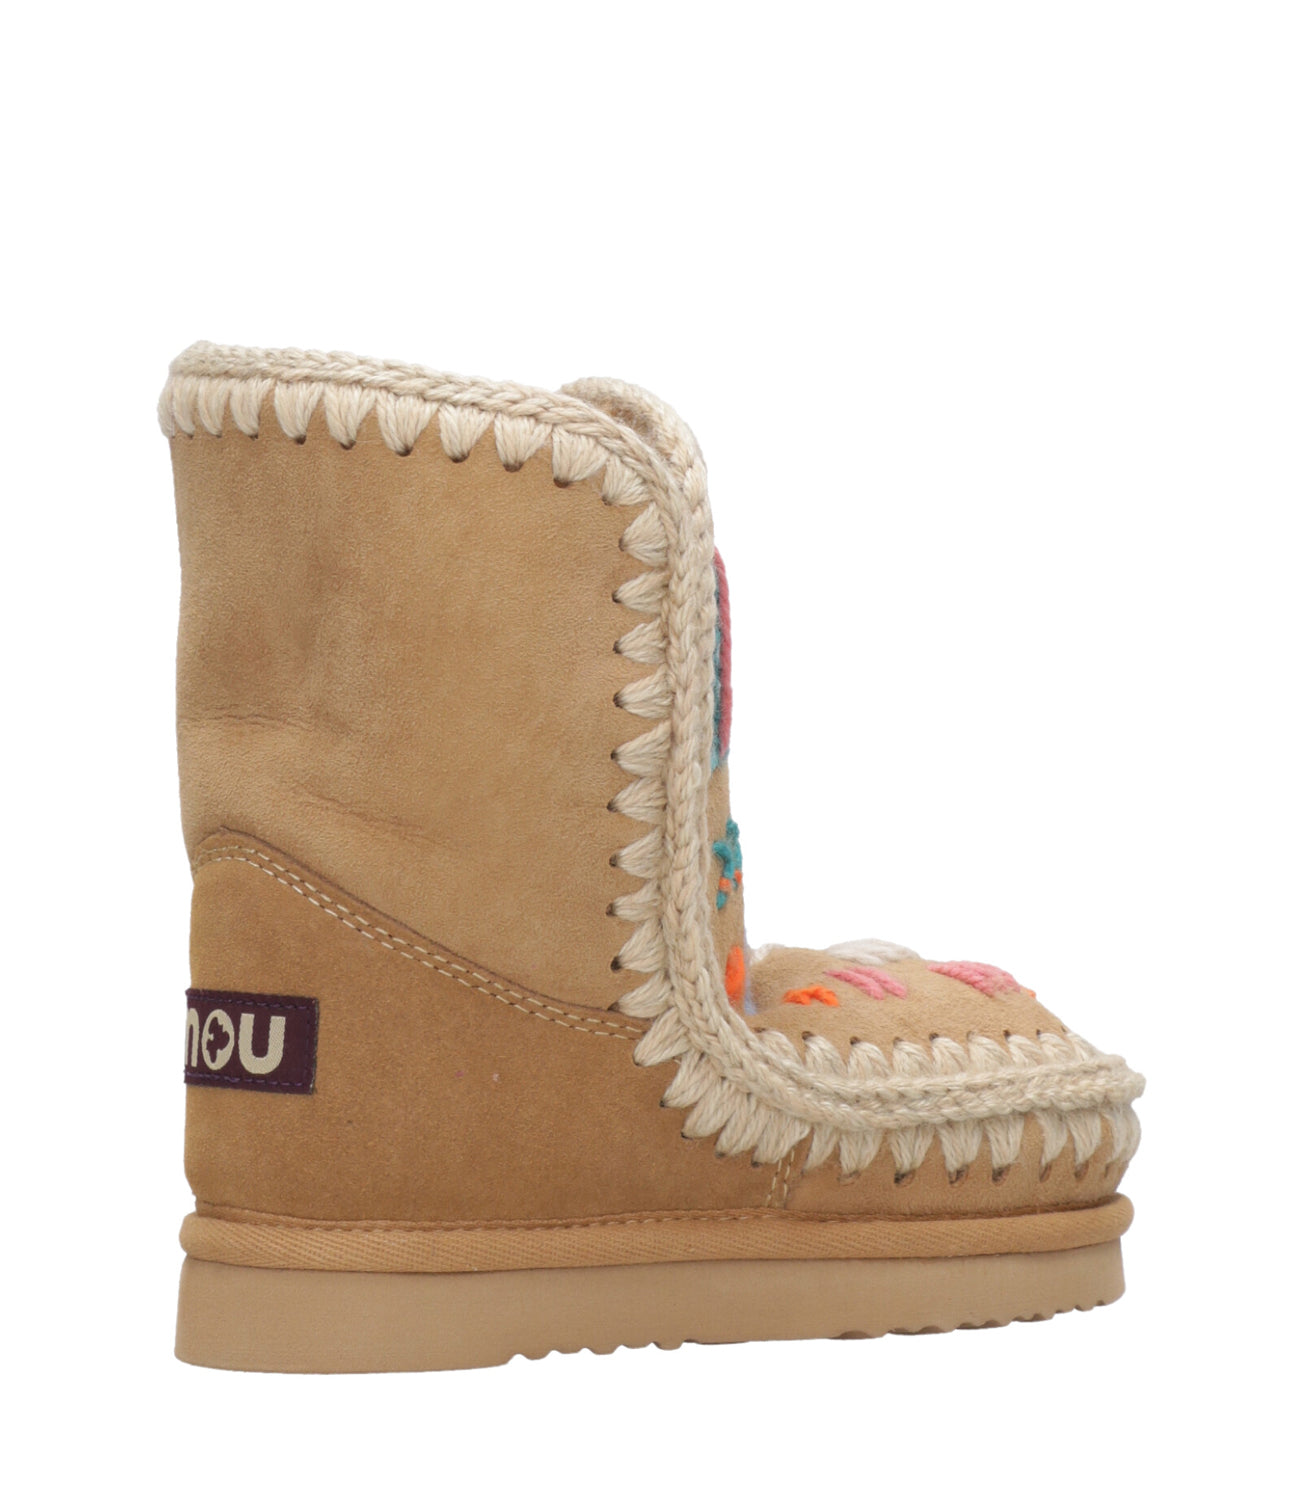 Mou Kids | Eskimo 04 Wool Embroidery Tobacco ankle boot